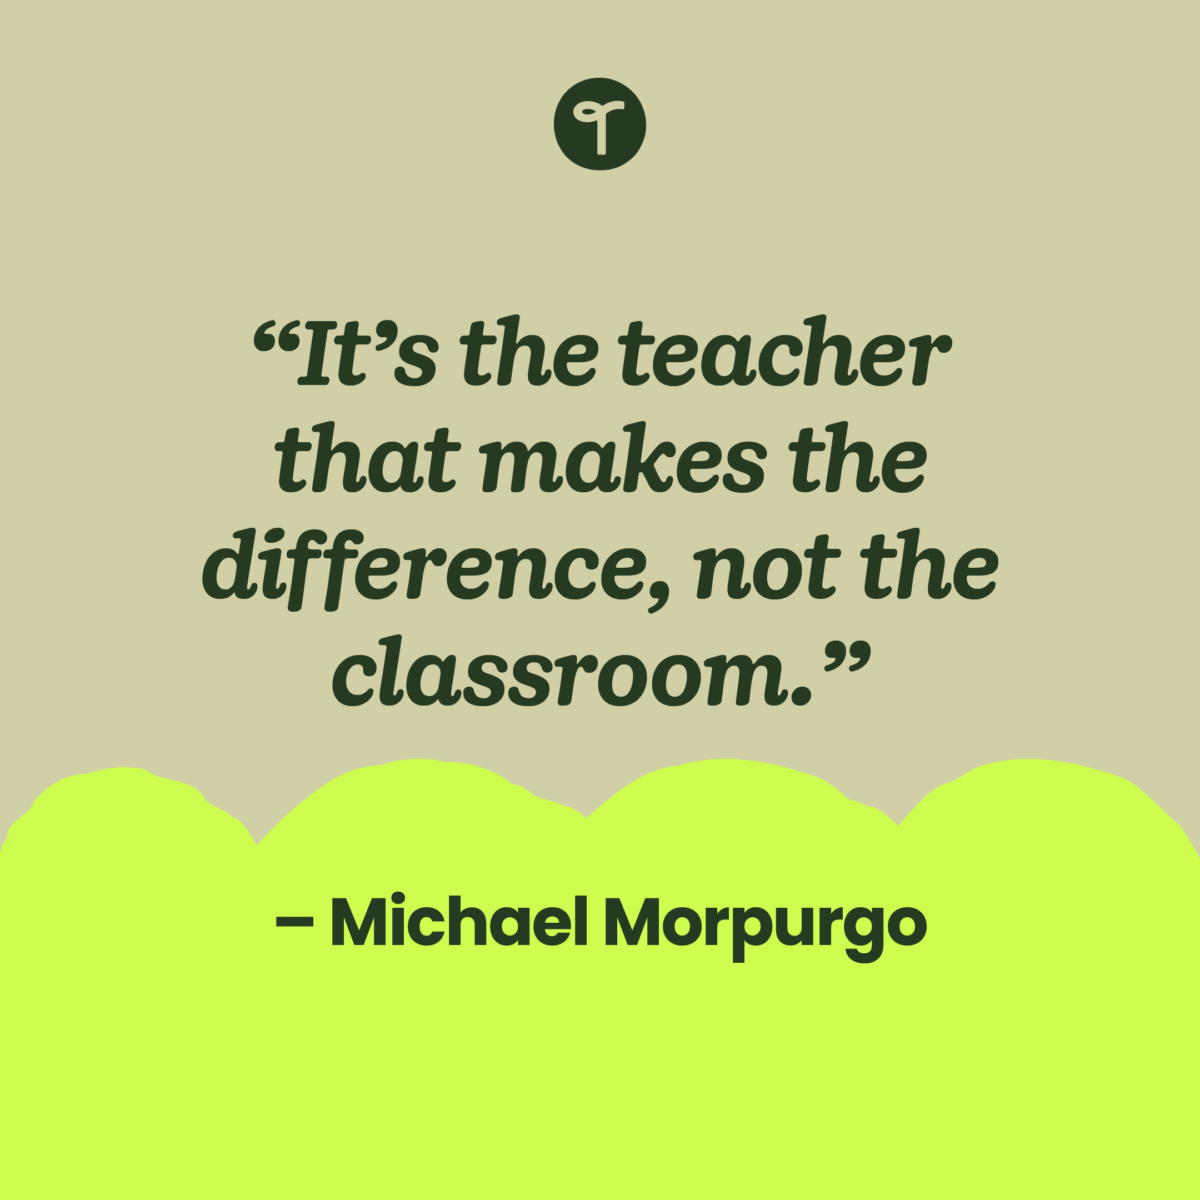 inspirational teacher quote “It’s the teacher that makes the difference, not the classroom.” –Michael Morpurgo